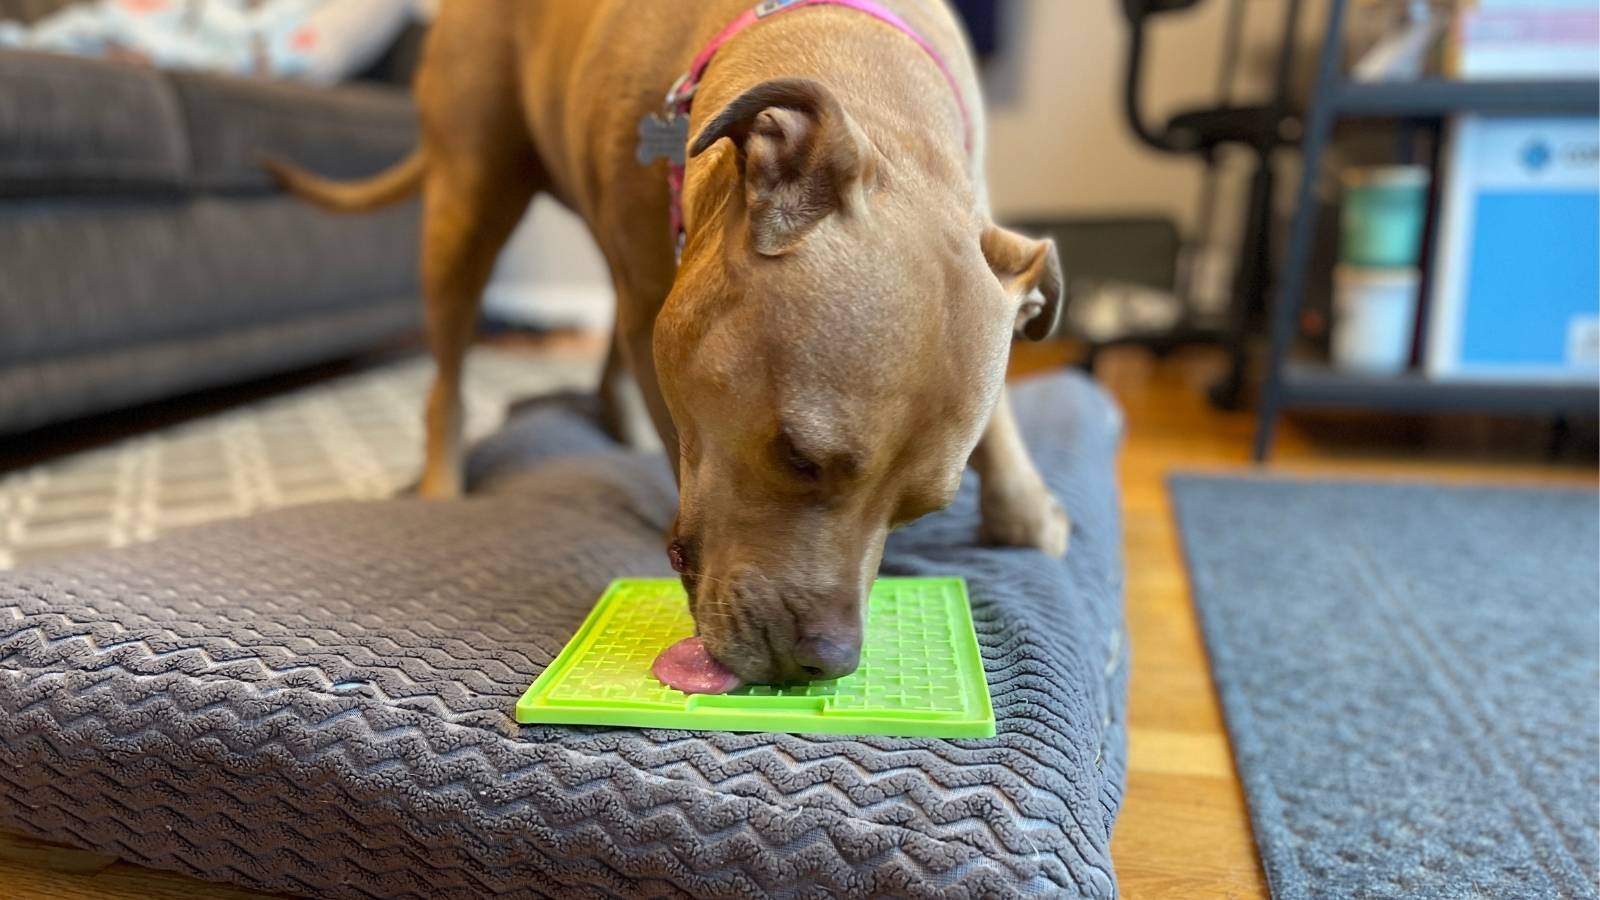 Licking mats helped us get through CCL surgery recovery with Goomba